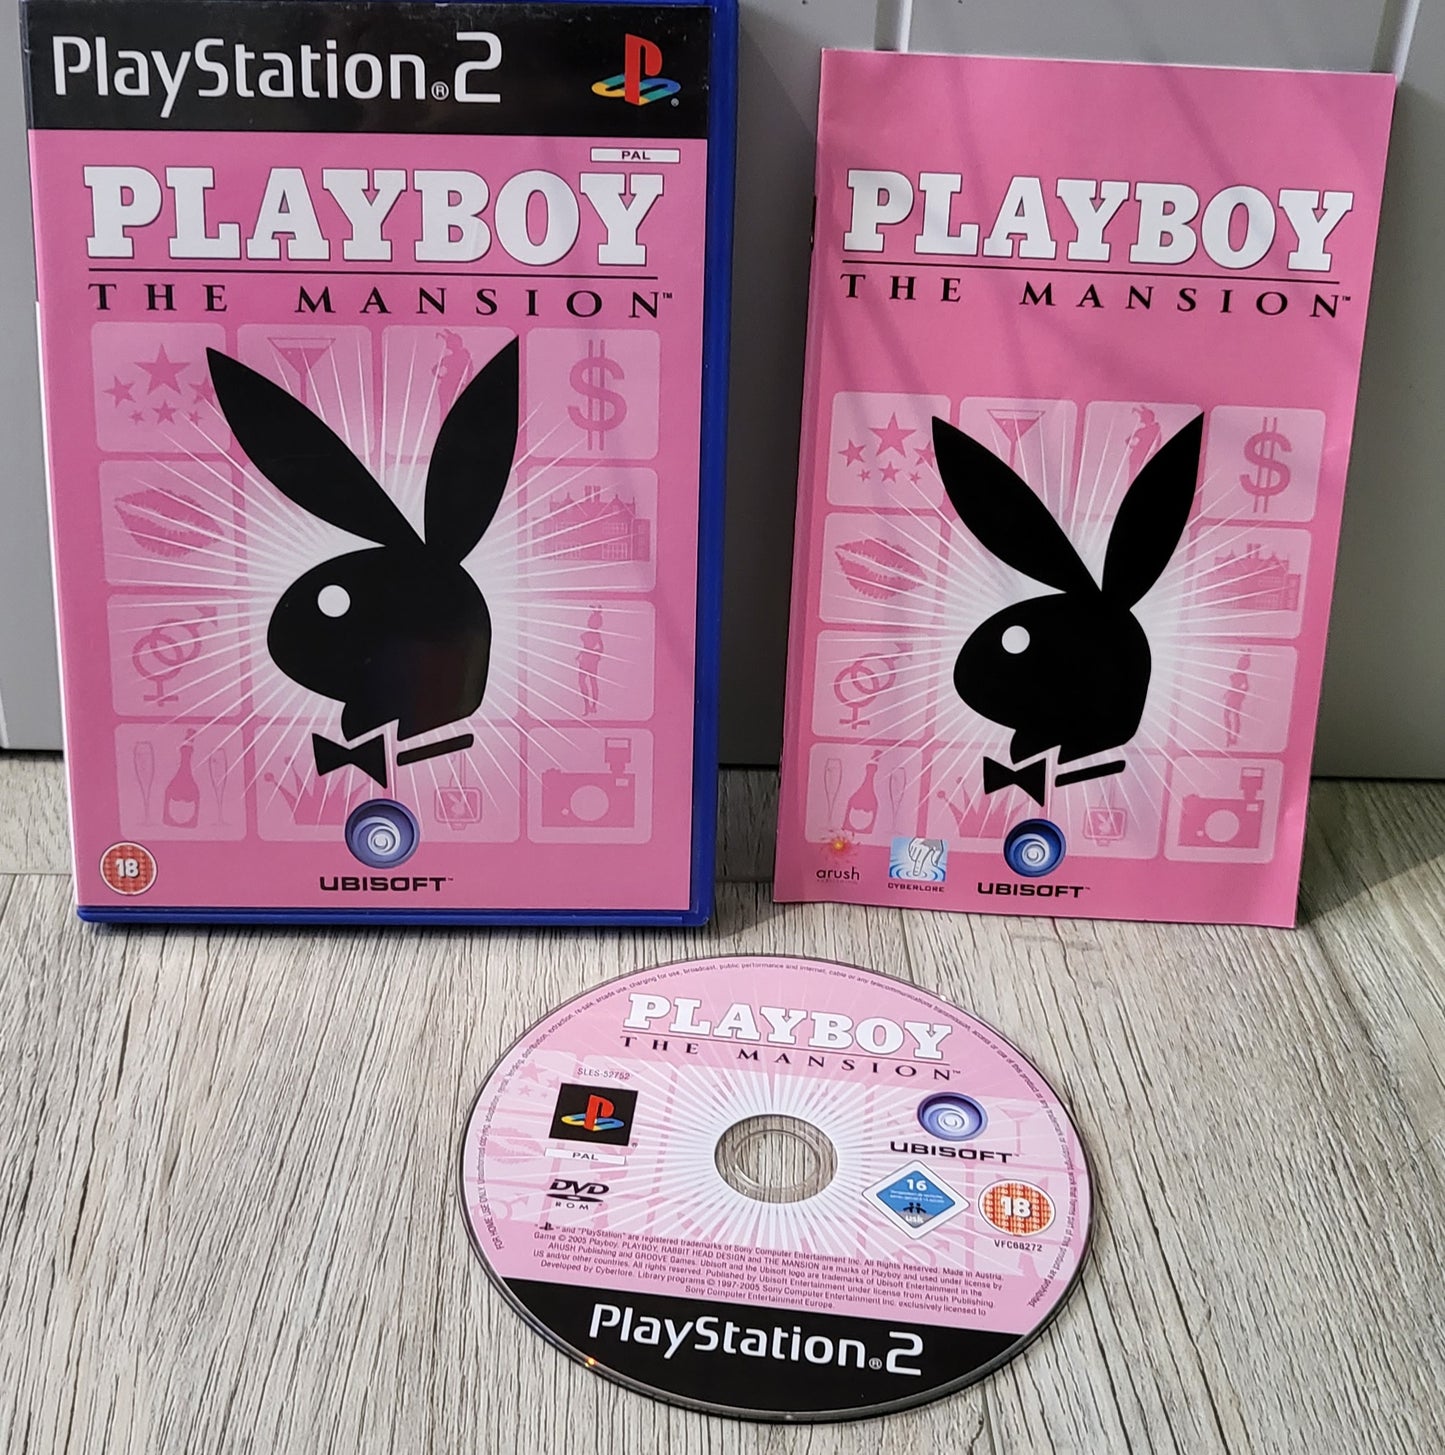 Playboy the Mansion Sony Playstation 2 (PS2) Game